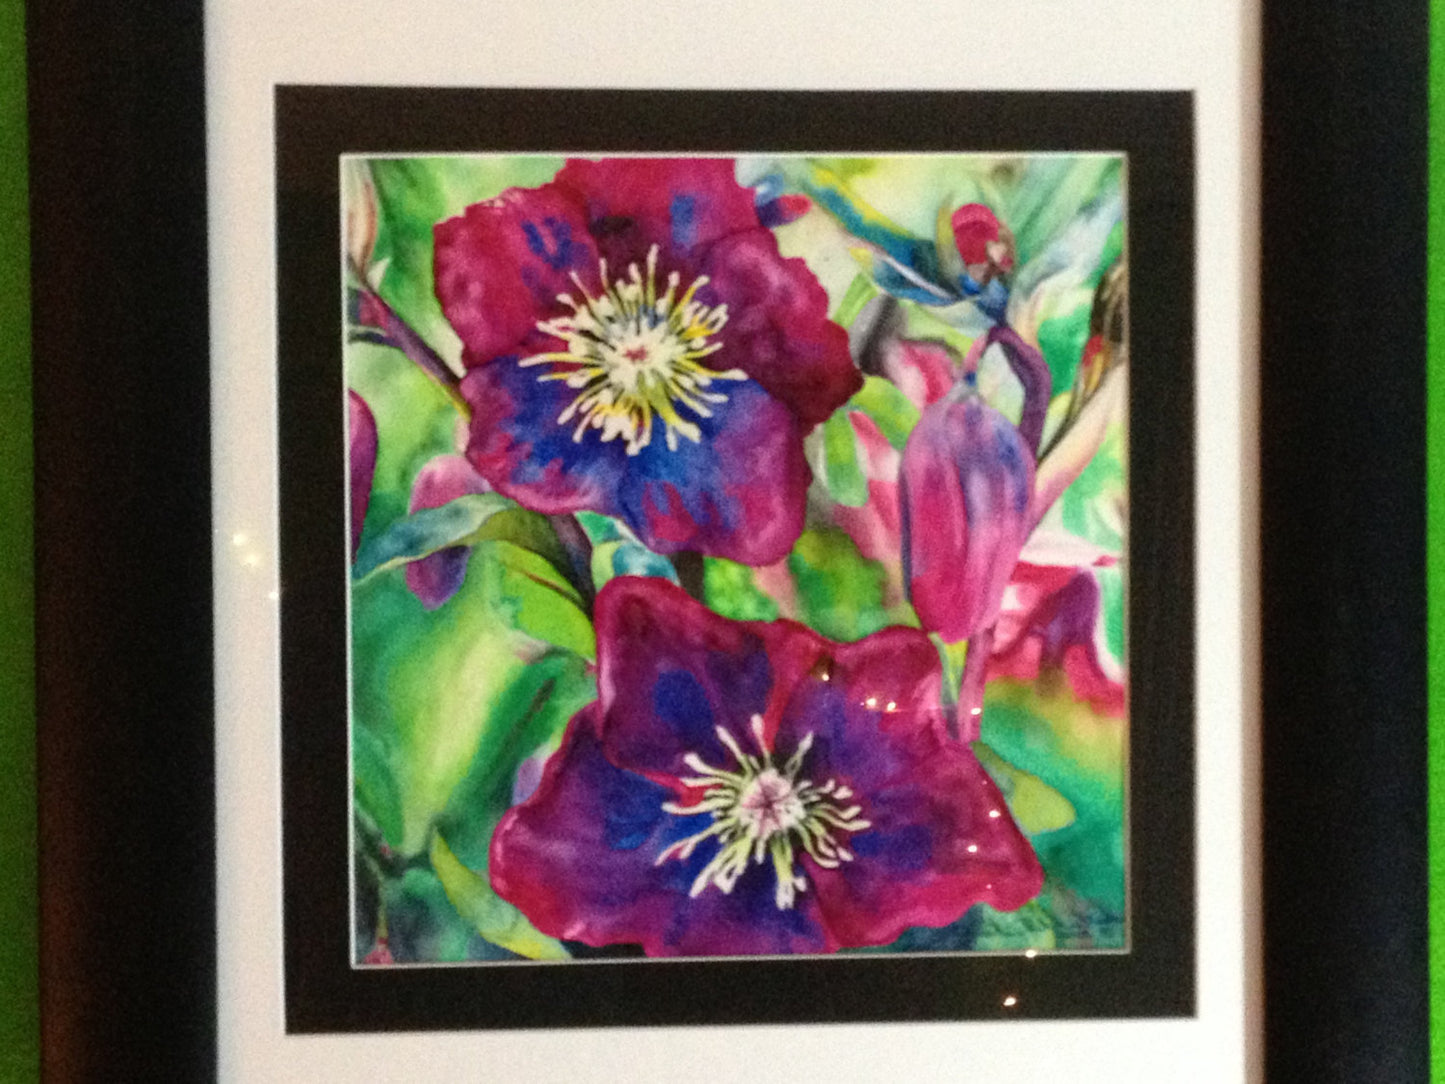 Framed Original Fine Art - PASSION - magenta pink flowers - 12" X 12"  Original Watercolor Painting Christie Marie E. Russell ©